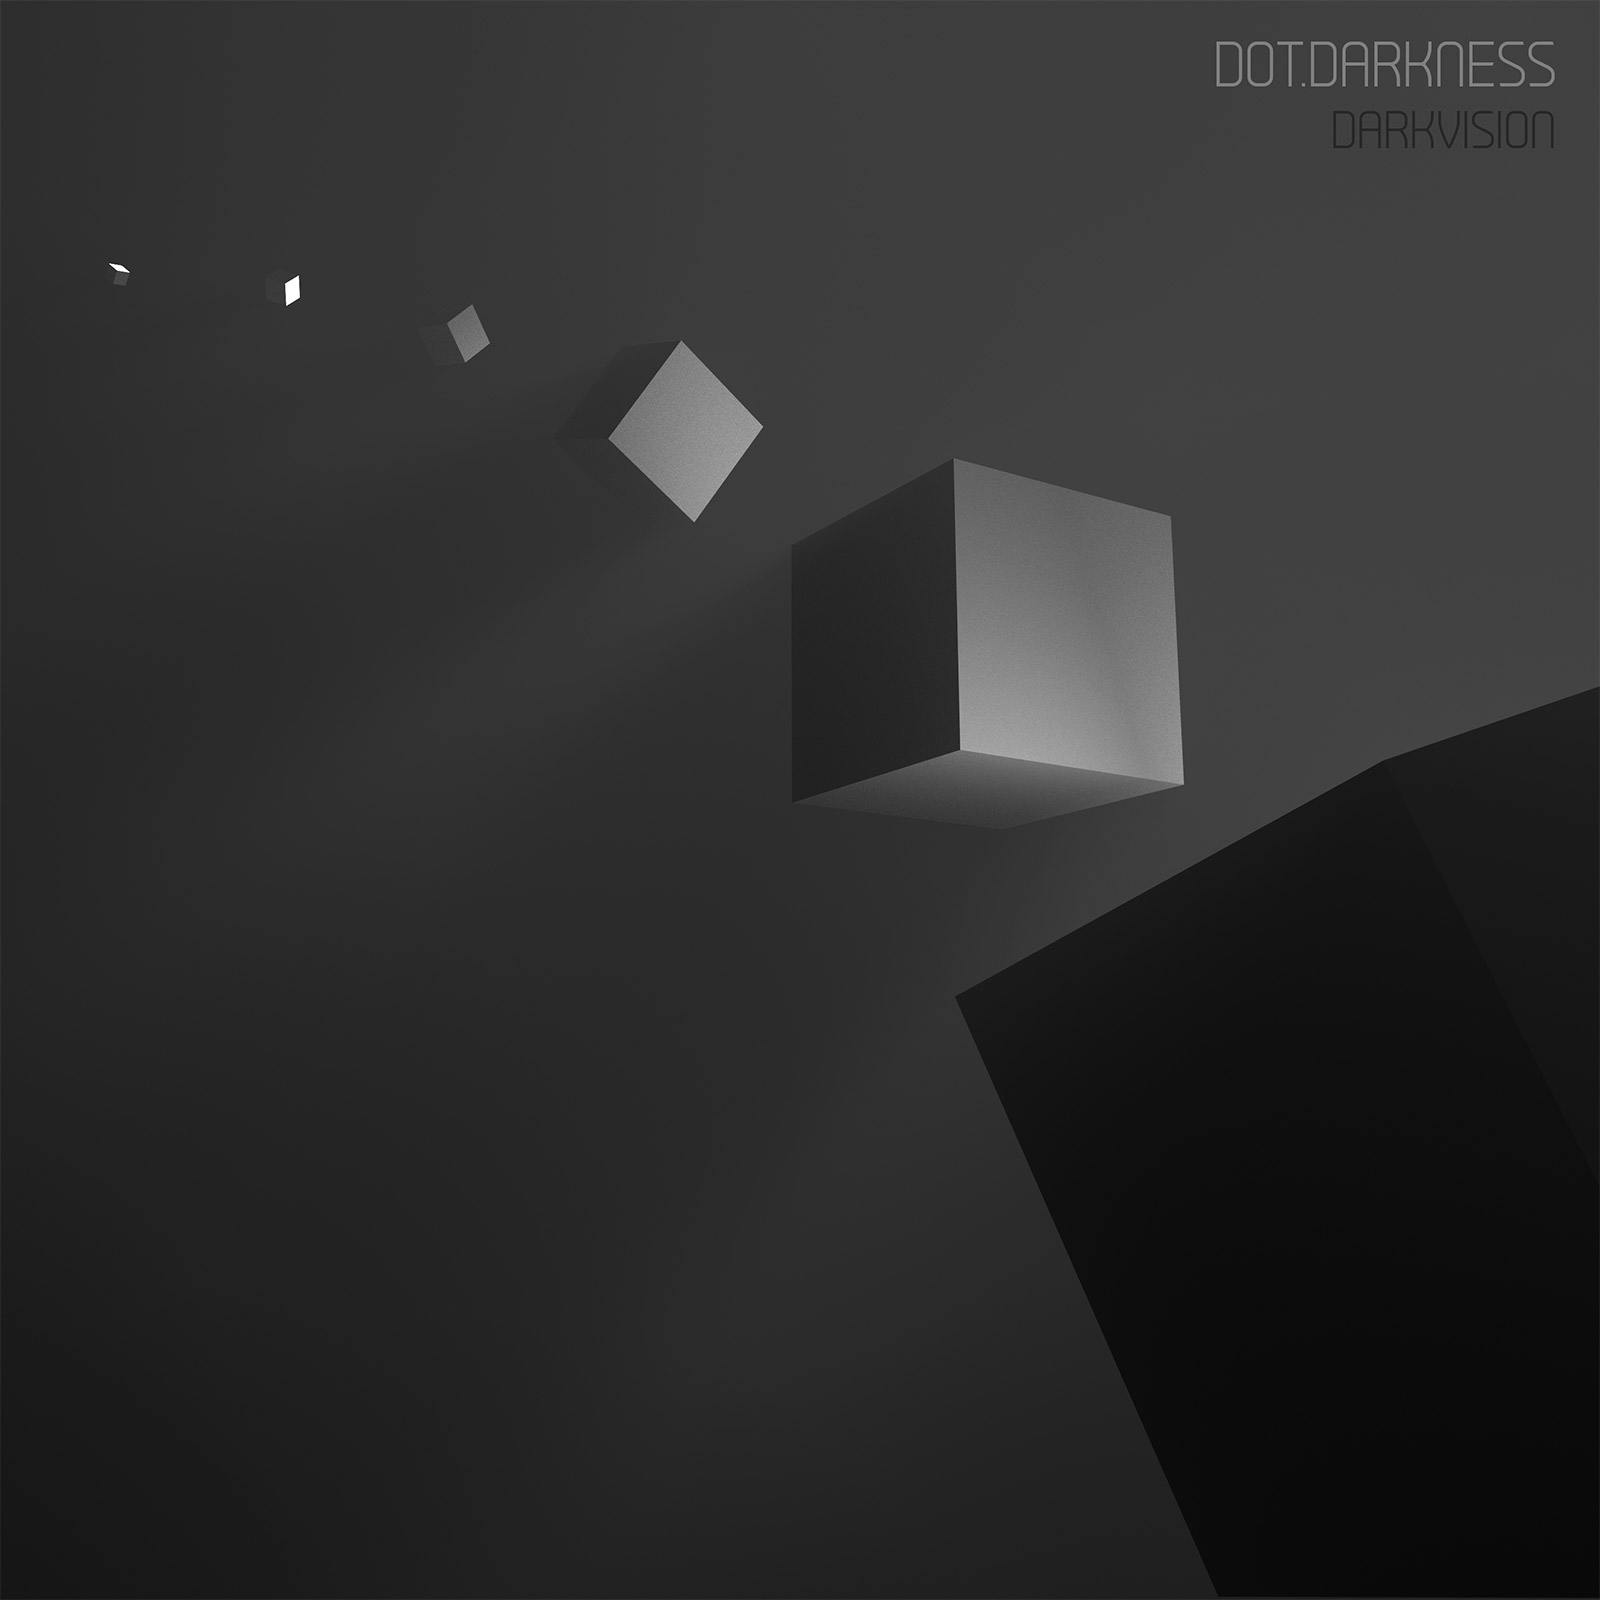 The album art for Darkvision. A dark background with 3D rendered cubes moving through space.